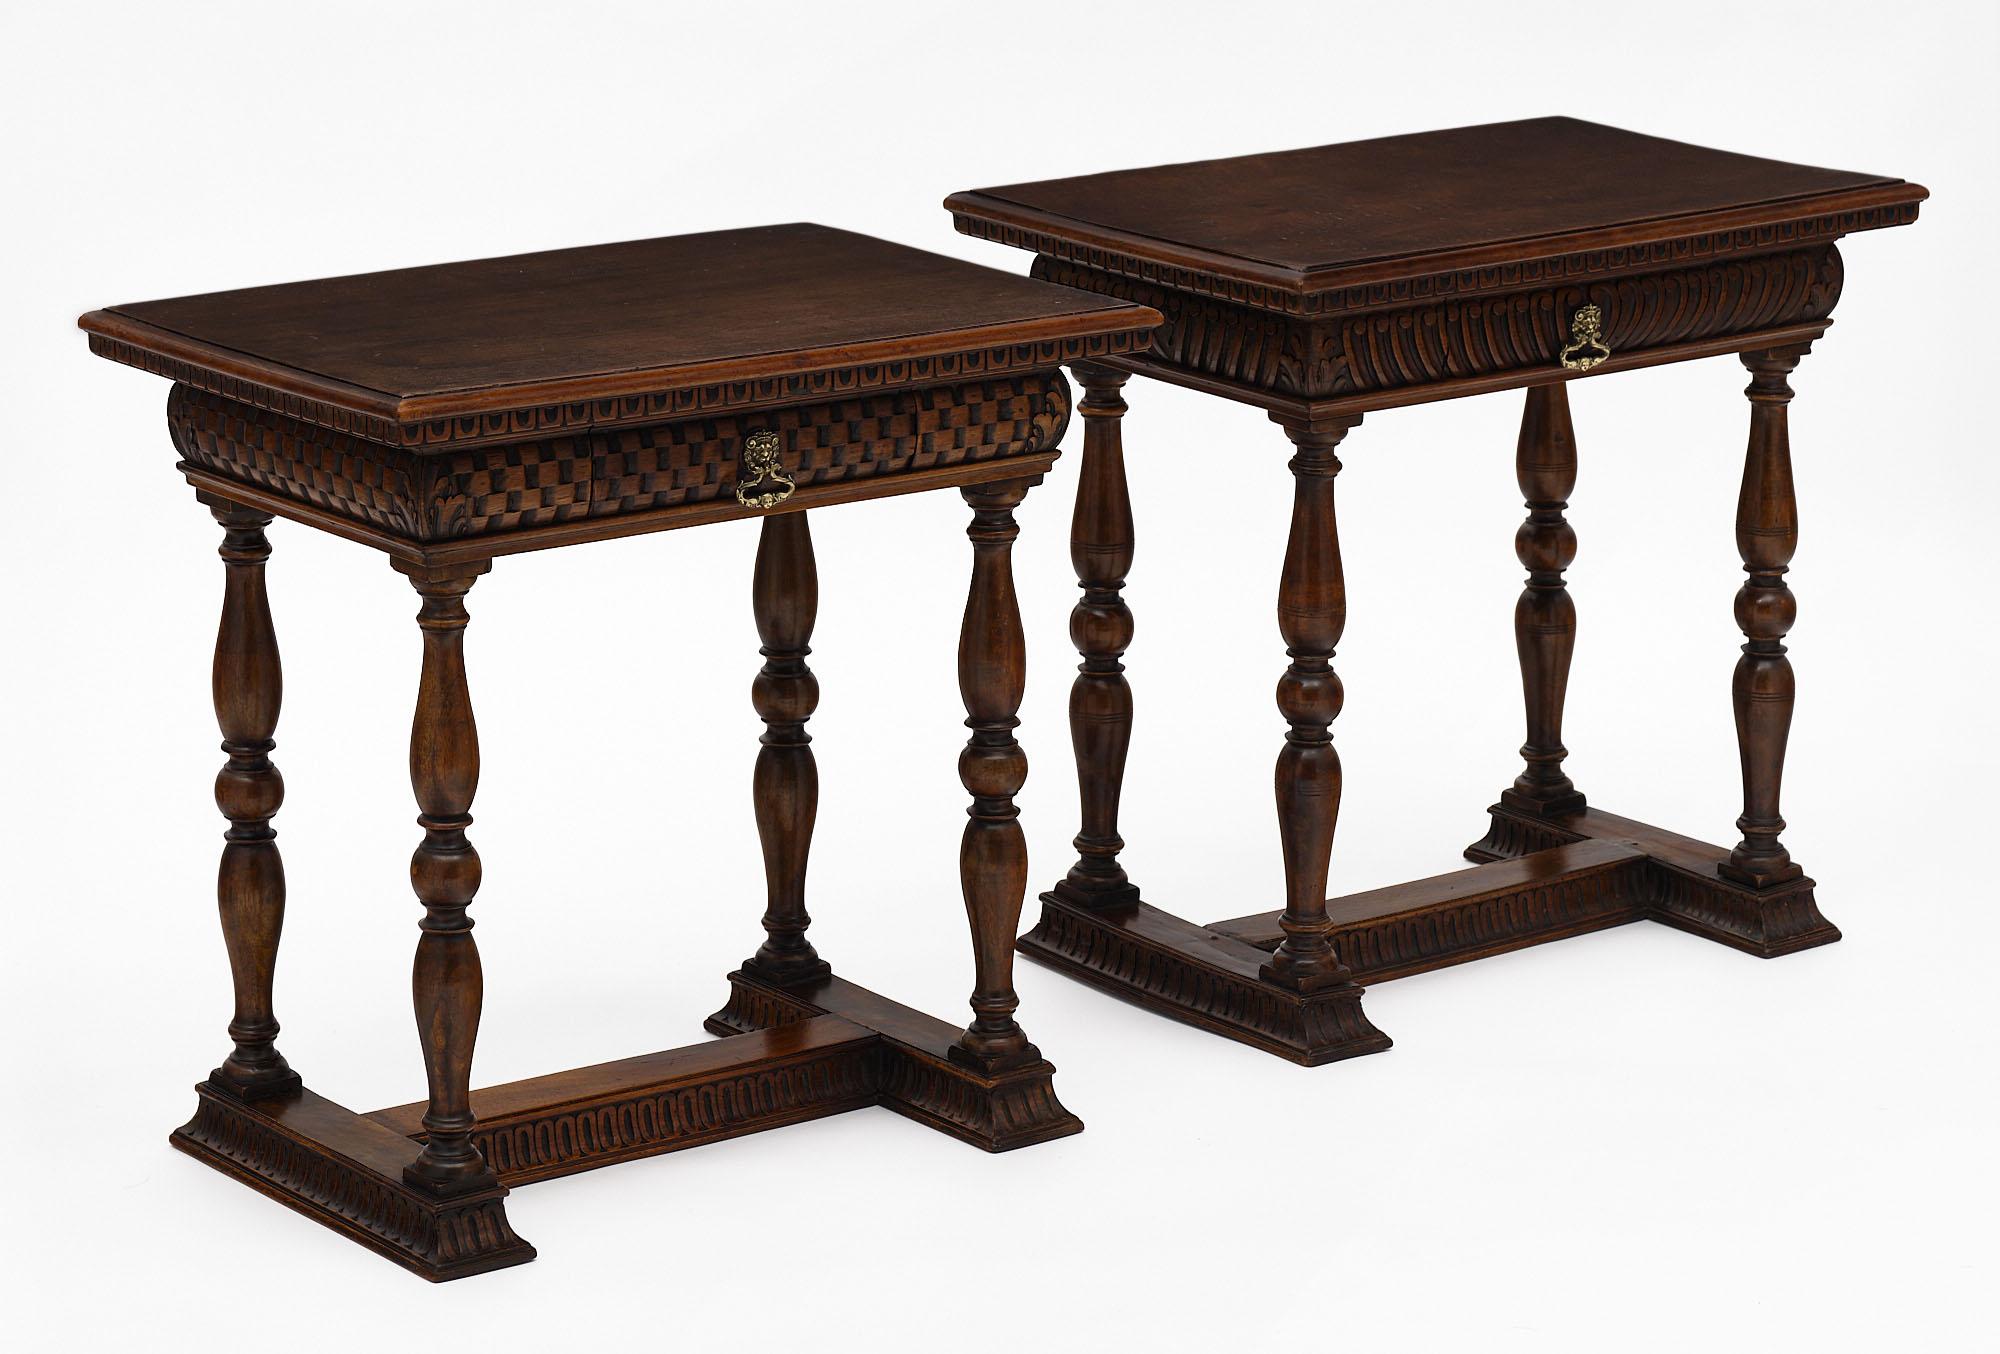 Pair of side tables from Tuscany in Italy made of hand-carved walnut with turned legs and h-stretcher. Each features a single dovetailed drawer with a lion-head pull. As they are hand-carved, the carved designs are each unique. We love the deep